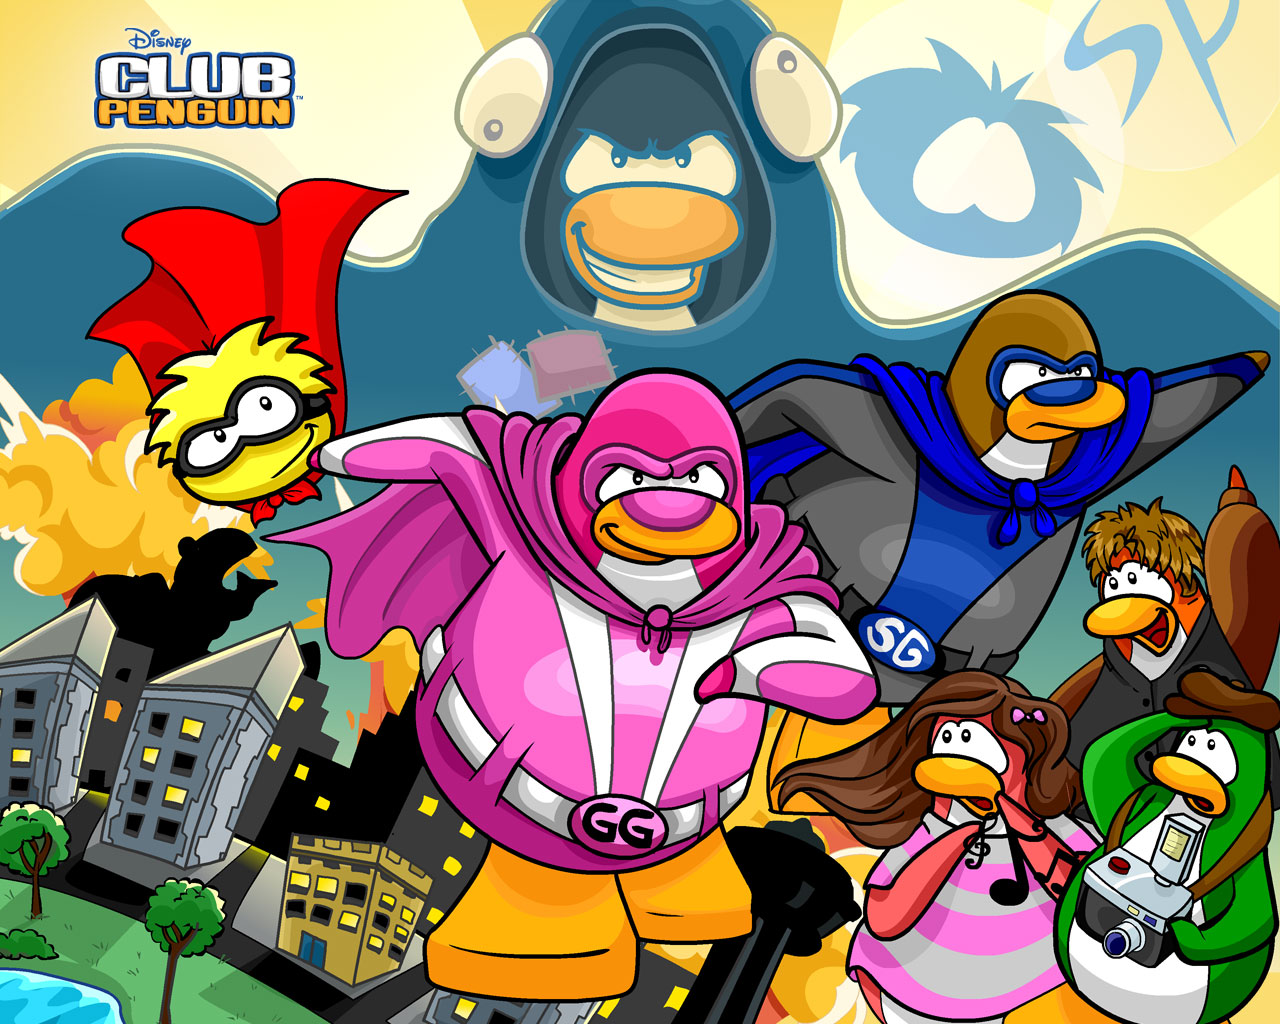 This Wallpaper As Your Desktop Background Just Visit My Club Penguin